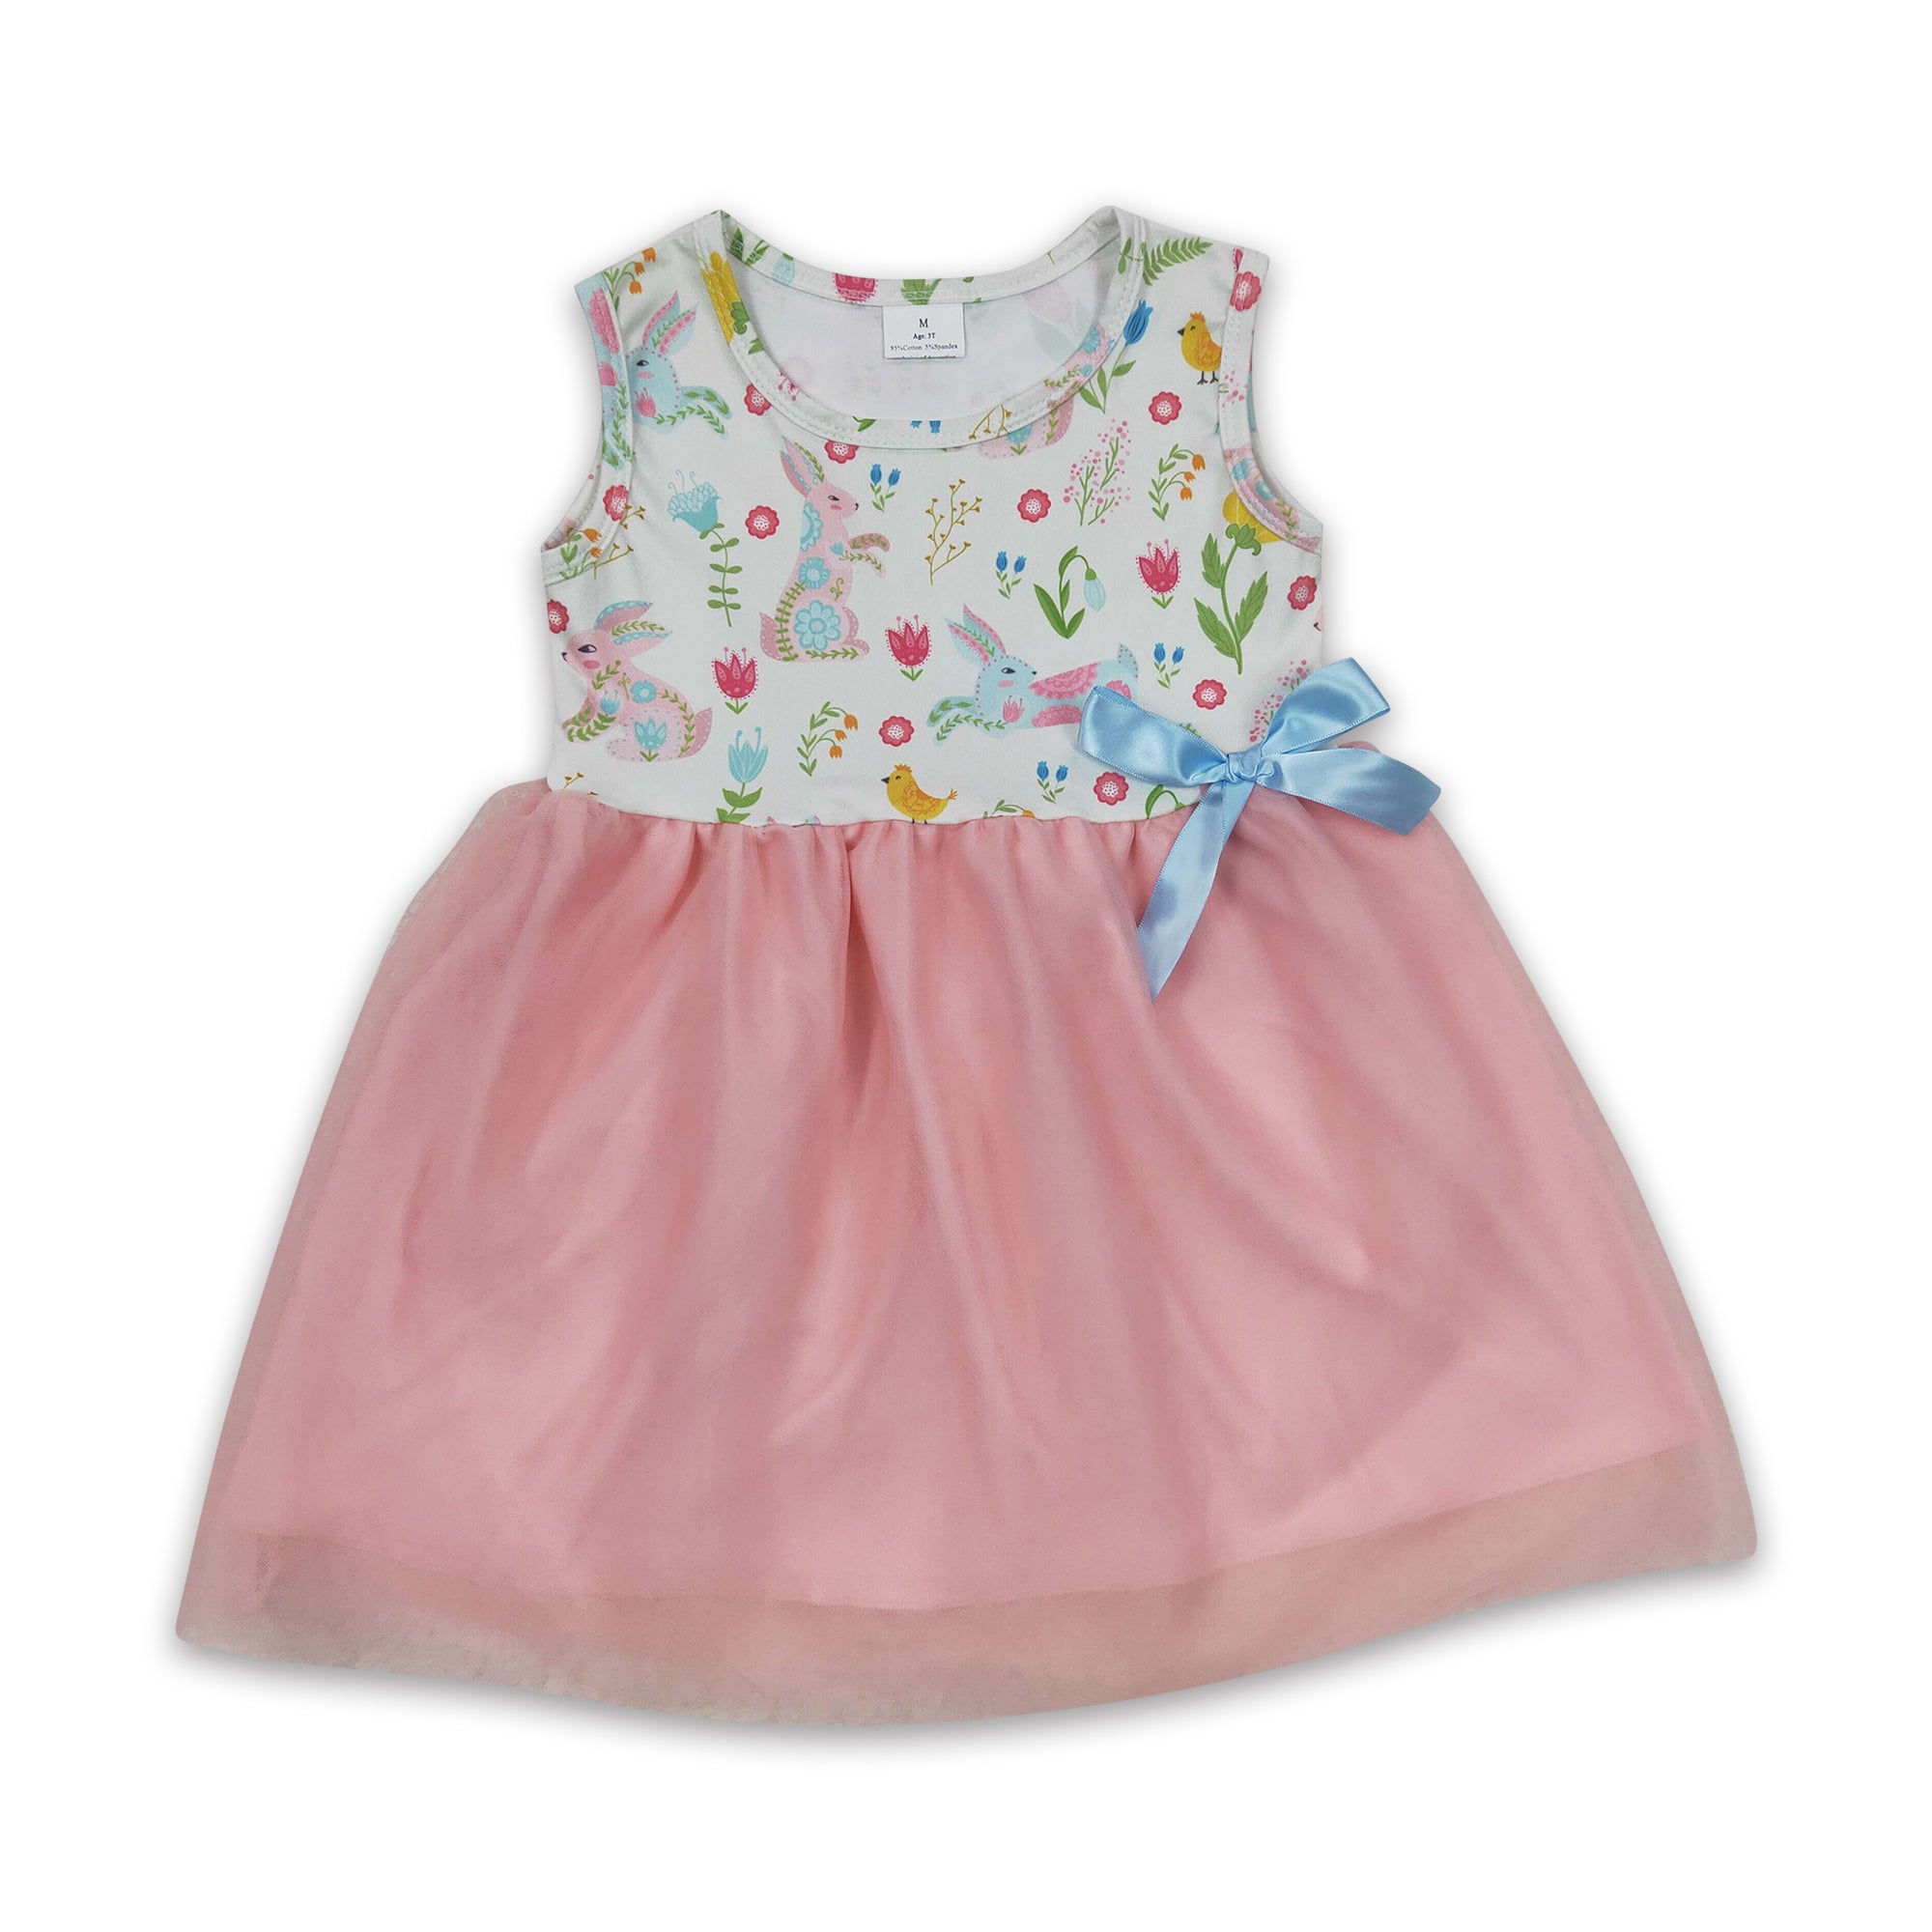 GSD0238 kids clothes girls bunny easter dress tulle flower girl dress party dress